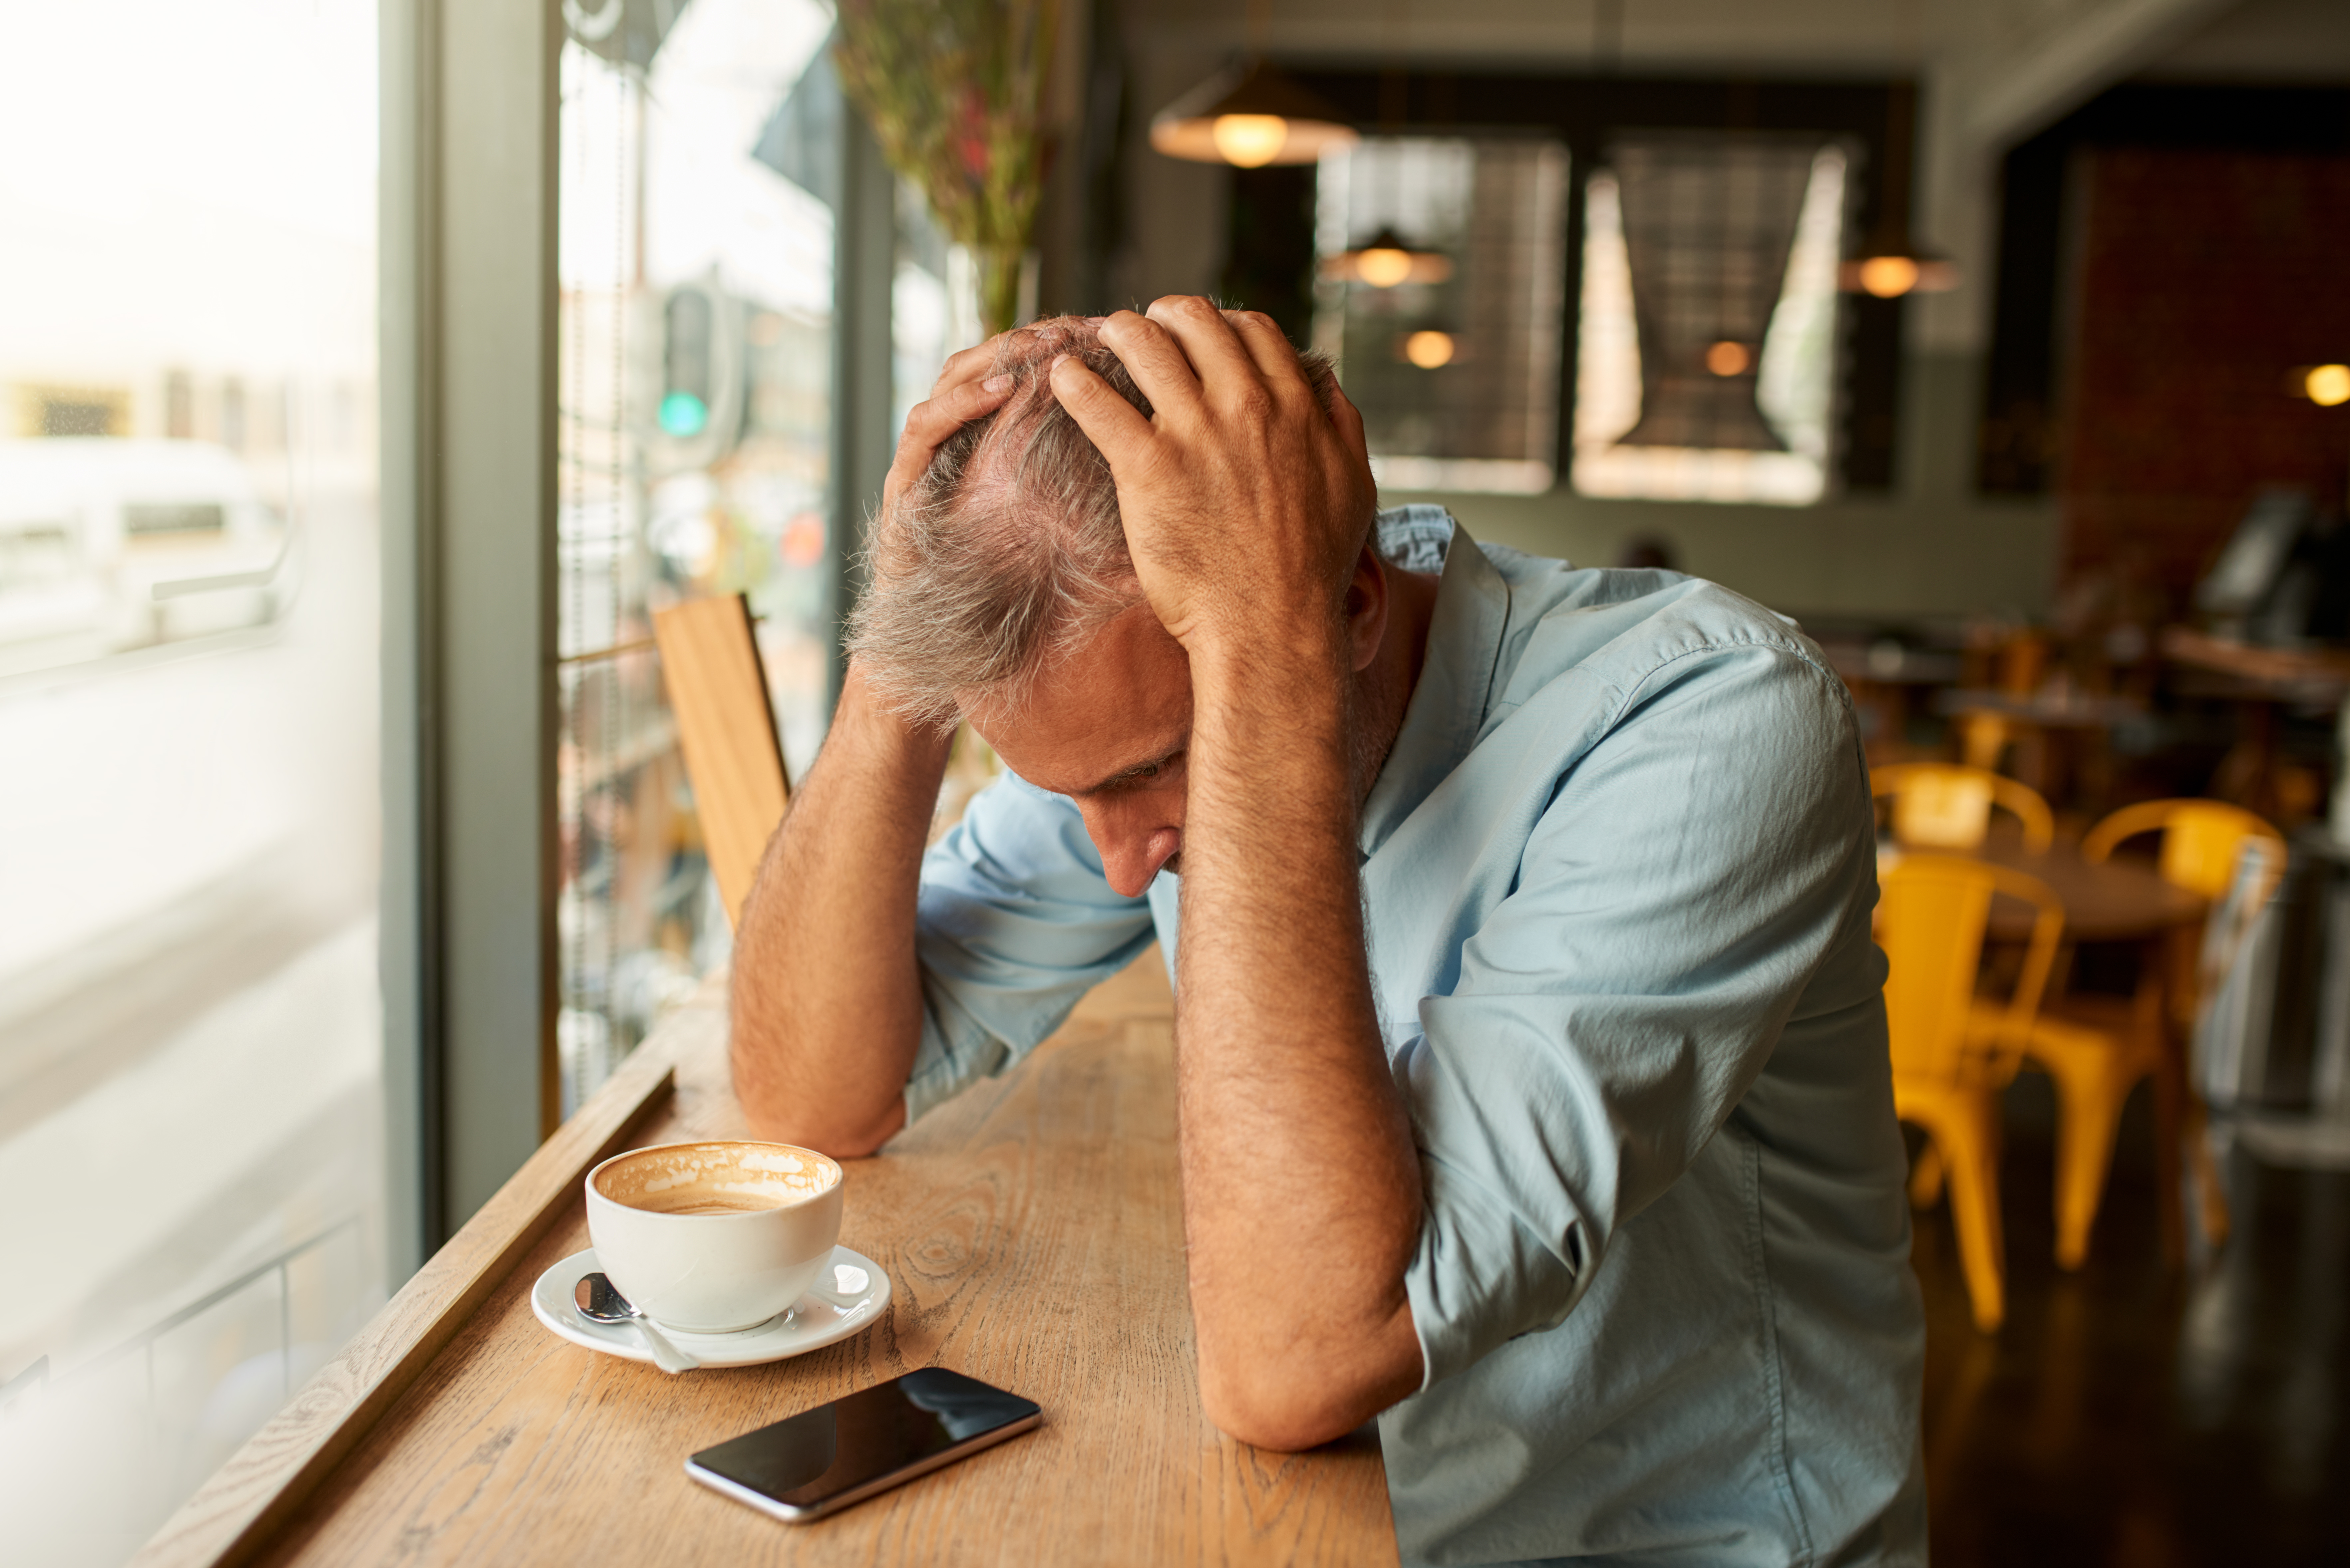 A stressed man looking at his mobile phone in a café | Source: Getty Images